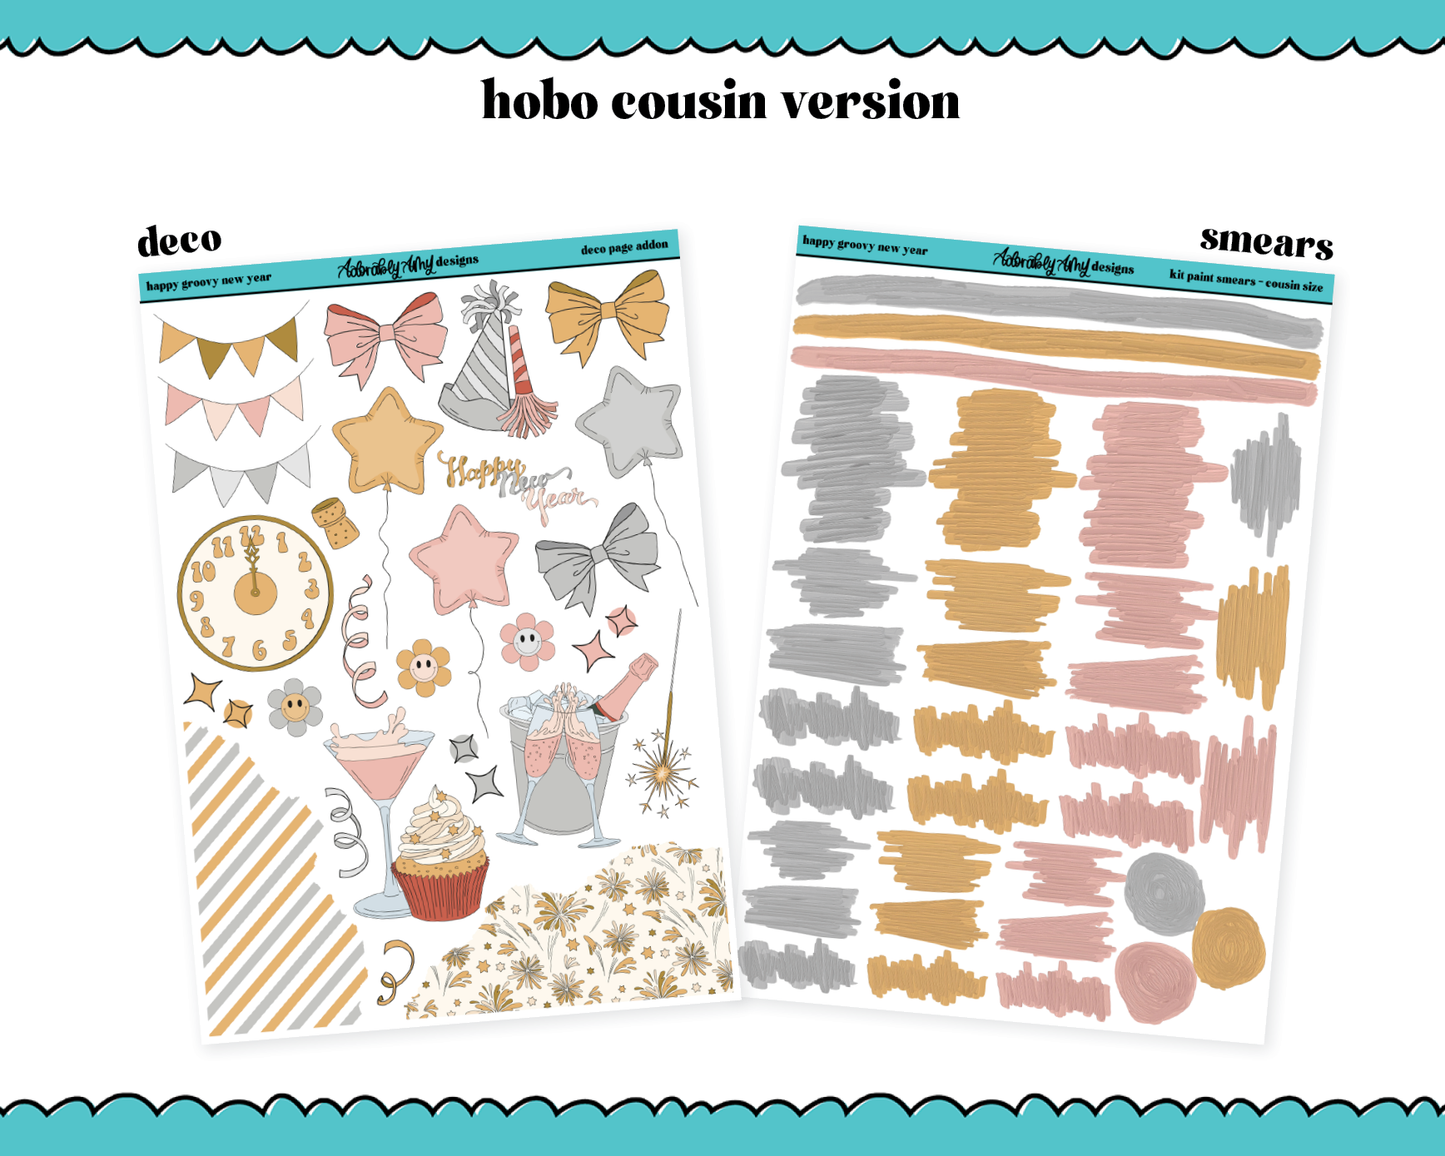 Hobonichi Cousin Weekly Happy Groovy New Year Planner Sticker Kit for Hobo Cousin or Similar Planners